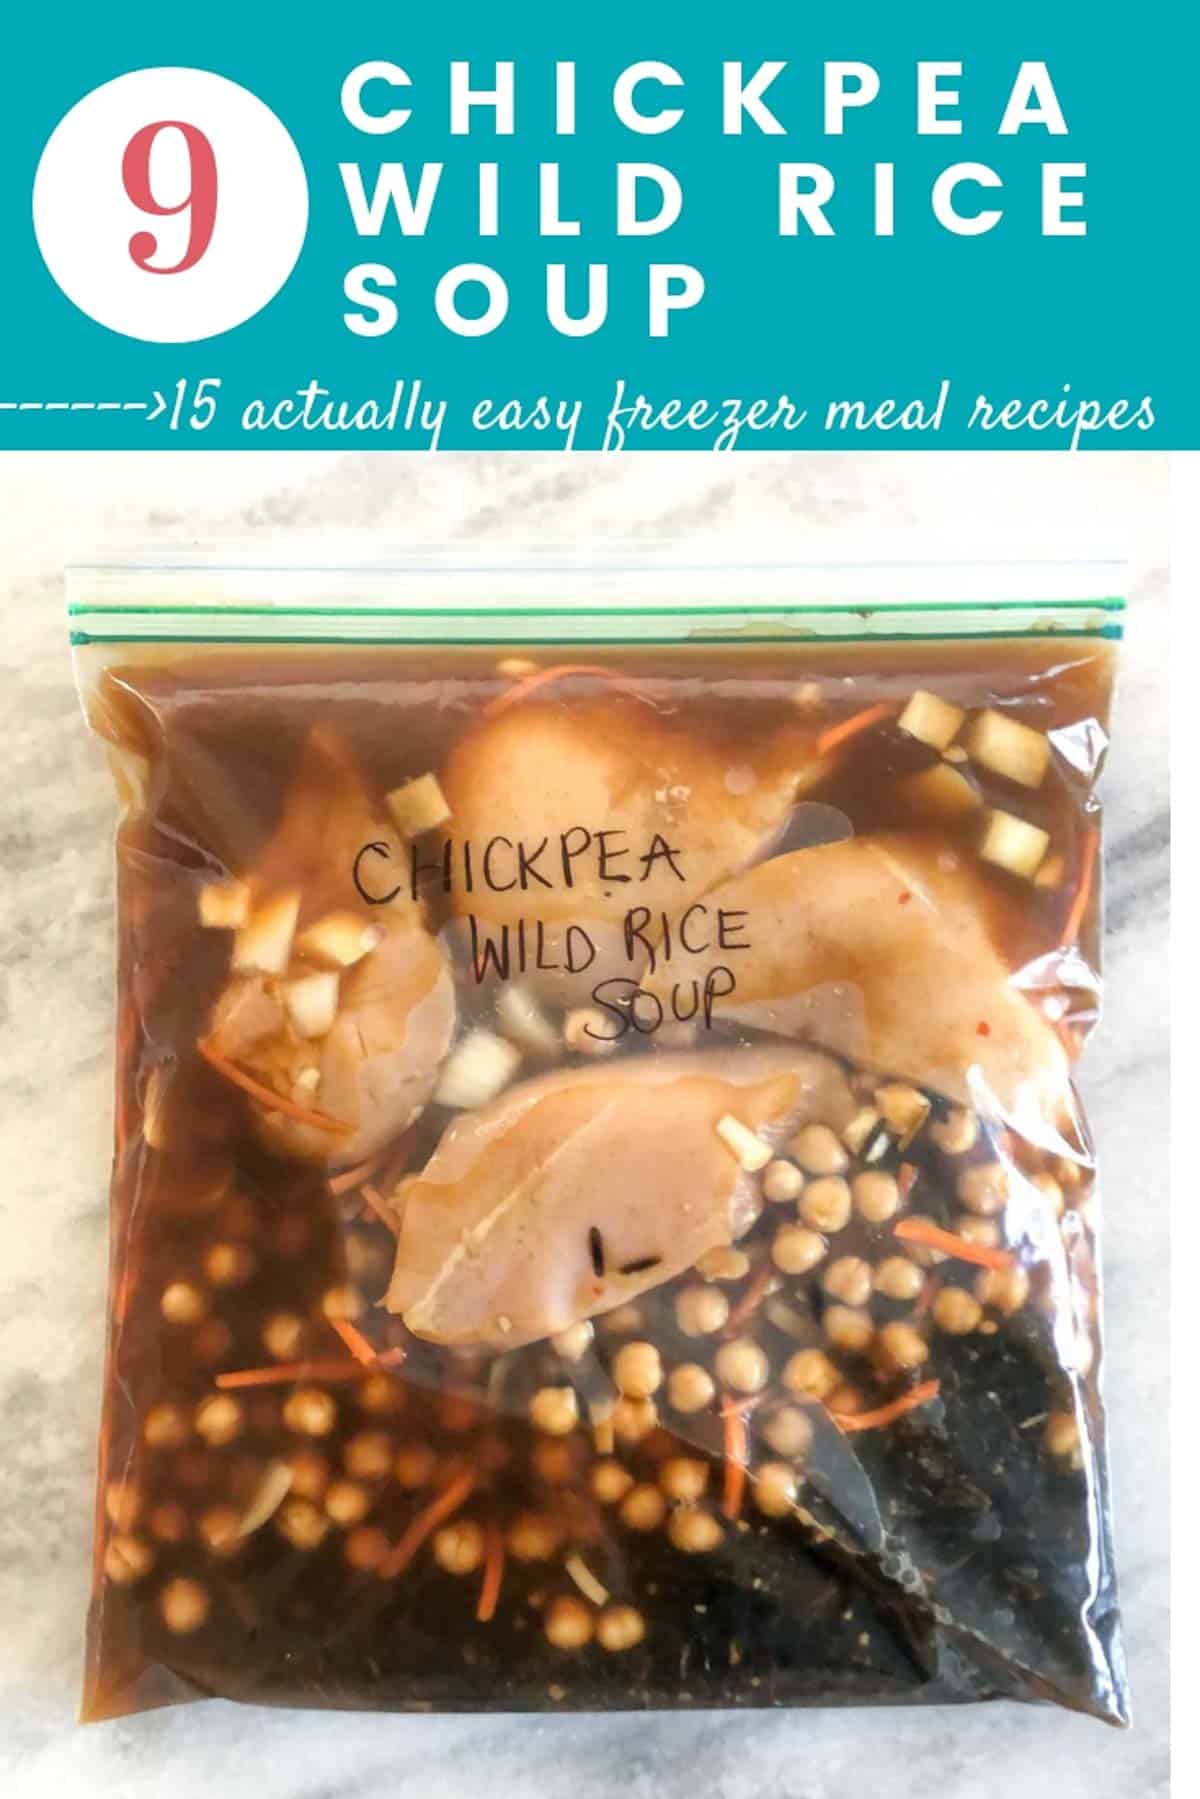 15 Easy freezer meals EPIC post : chickpea wild rice soup in a freezer meal bag